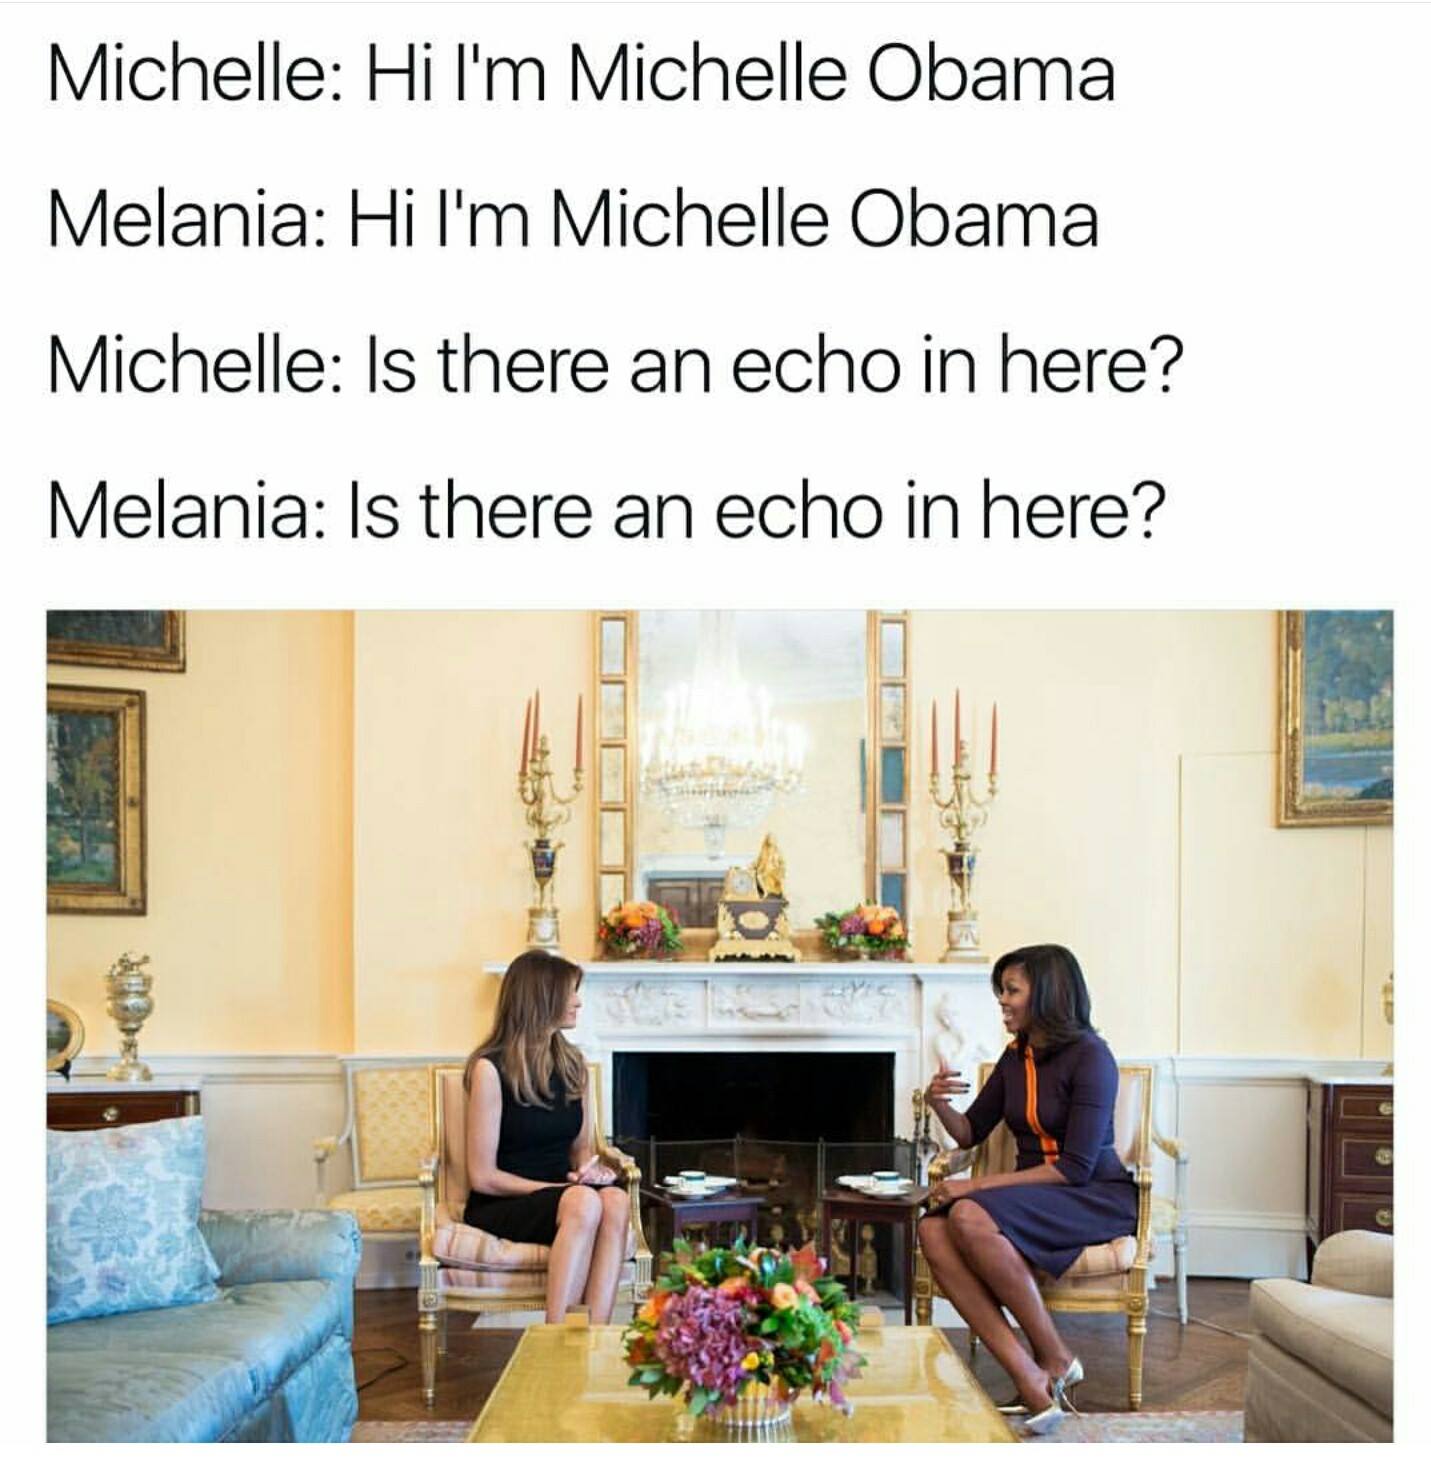 michelle obama has them both - Michelle Hi I'm Michelle Obama Melania Hi I'm Michelle Obama Michelle Is there an echo in here? Melania Is there an echo in here?